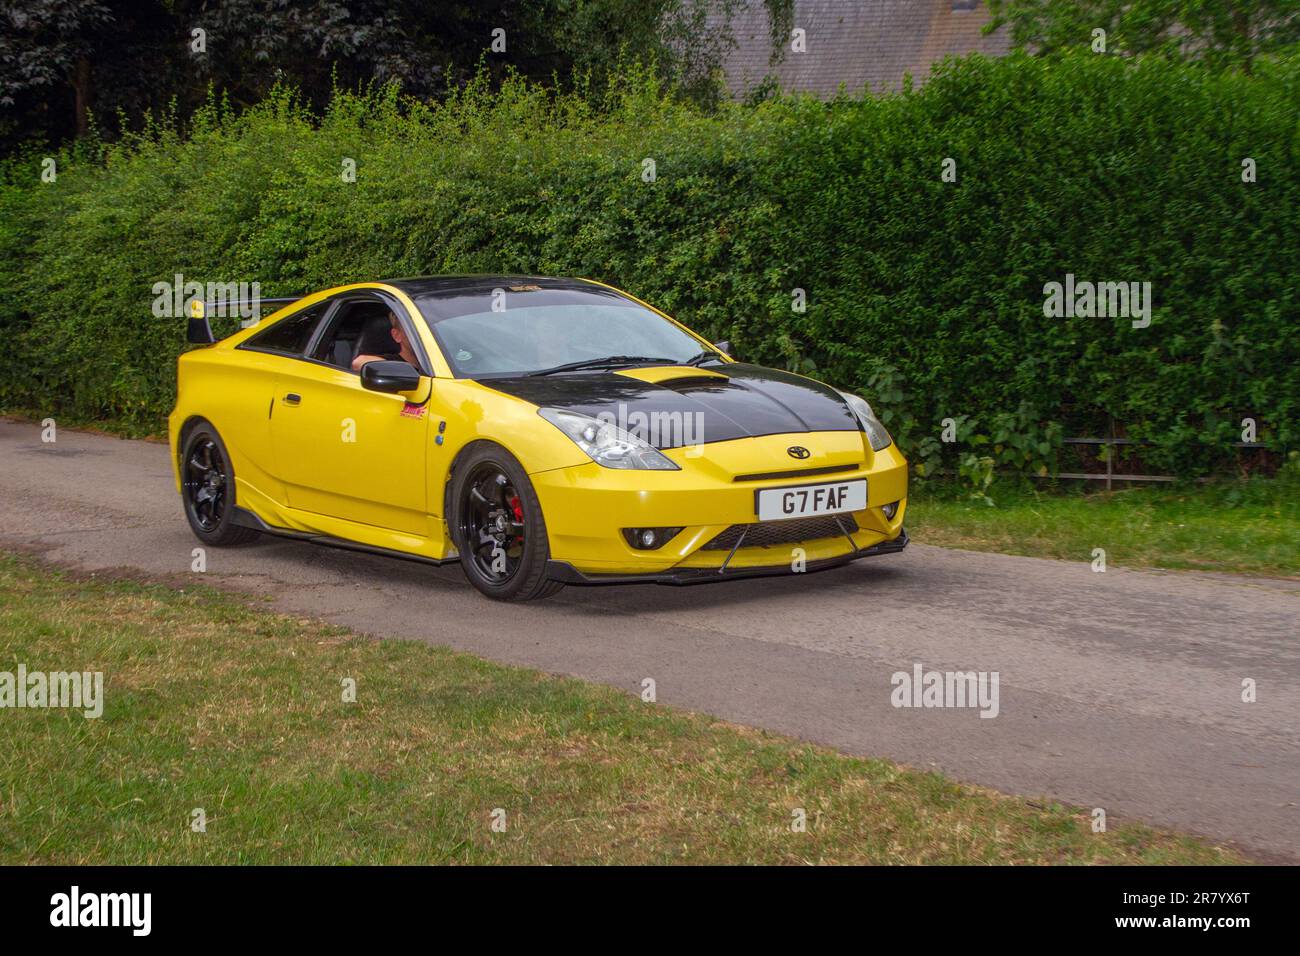 2003 Black Yellow Toyota Celica T Sport Vvtli; a range of rare, exciting and unusual vehicle enthusiasts & attendees at Worden Park Motor Village showcase, Leyland Festival, UK Stock Photo